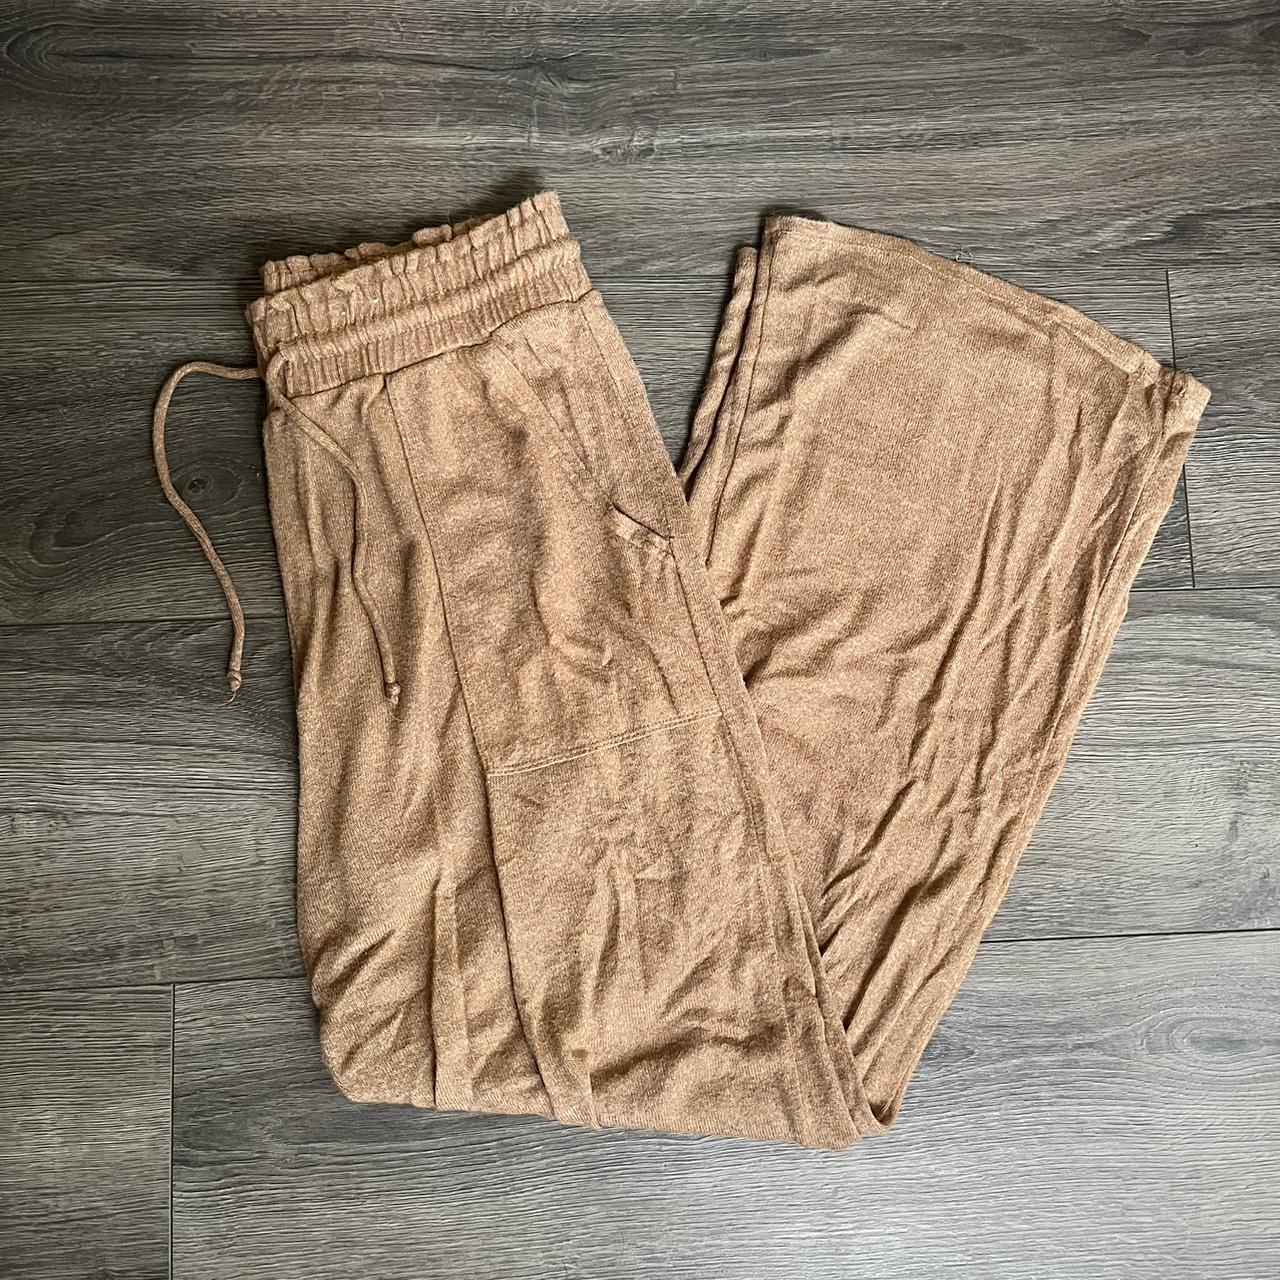 Knit lounge pants - Titled “Women's Perfectly Cozy - Depop